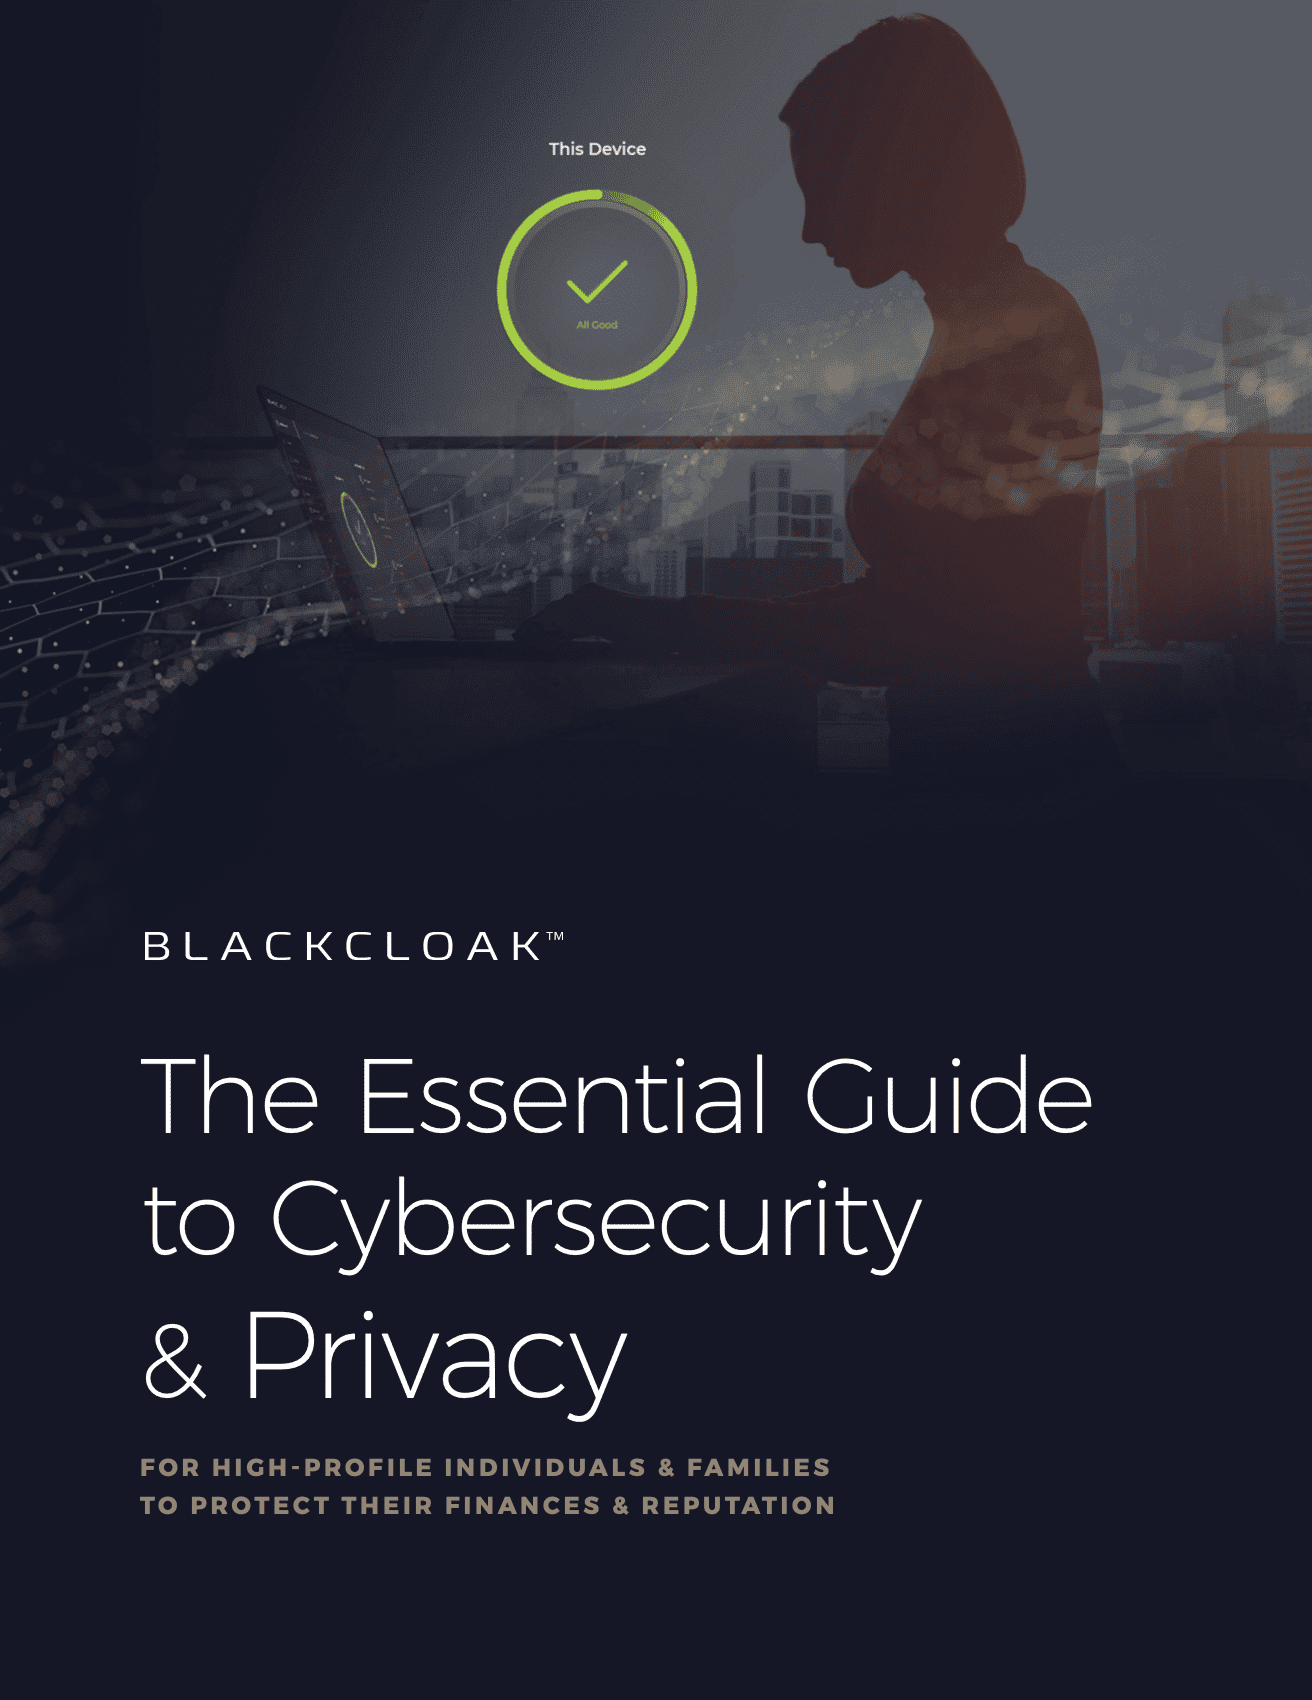 The essential guide to cybersecurity & privacy